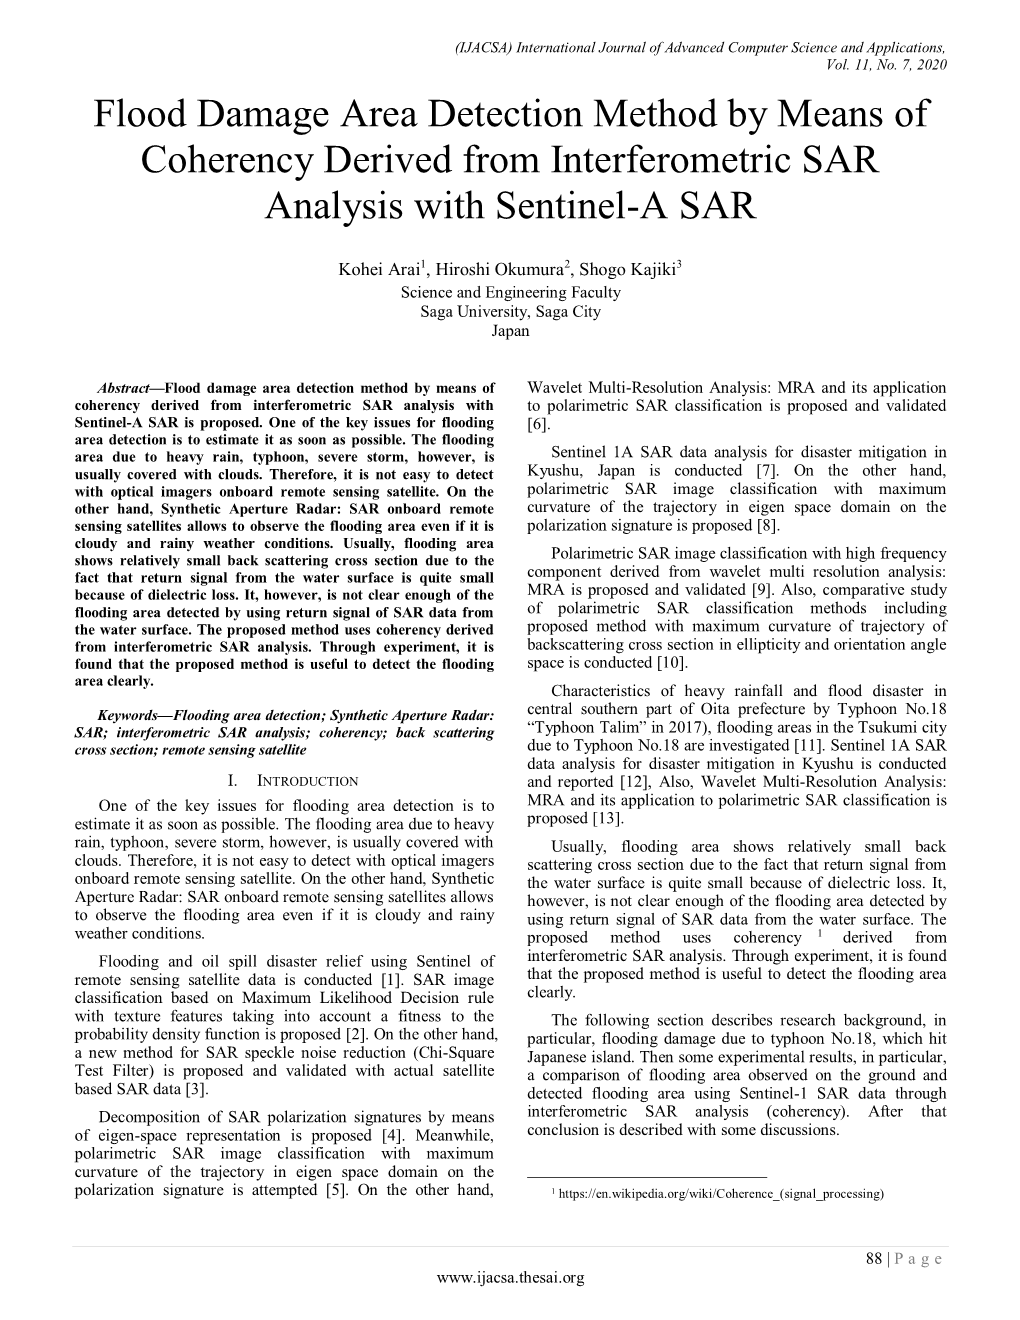 Flood Damage Area Detection Method by Means of Coherency Derived from Interferometric SAR Analysis with Sentinel-A SAR